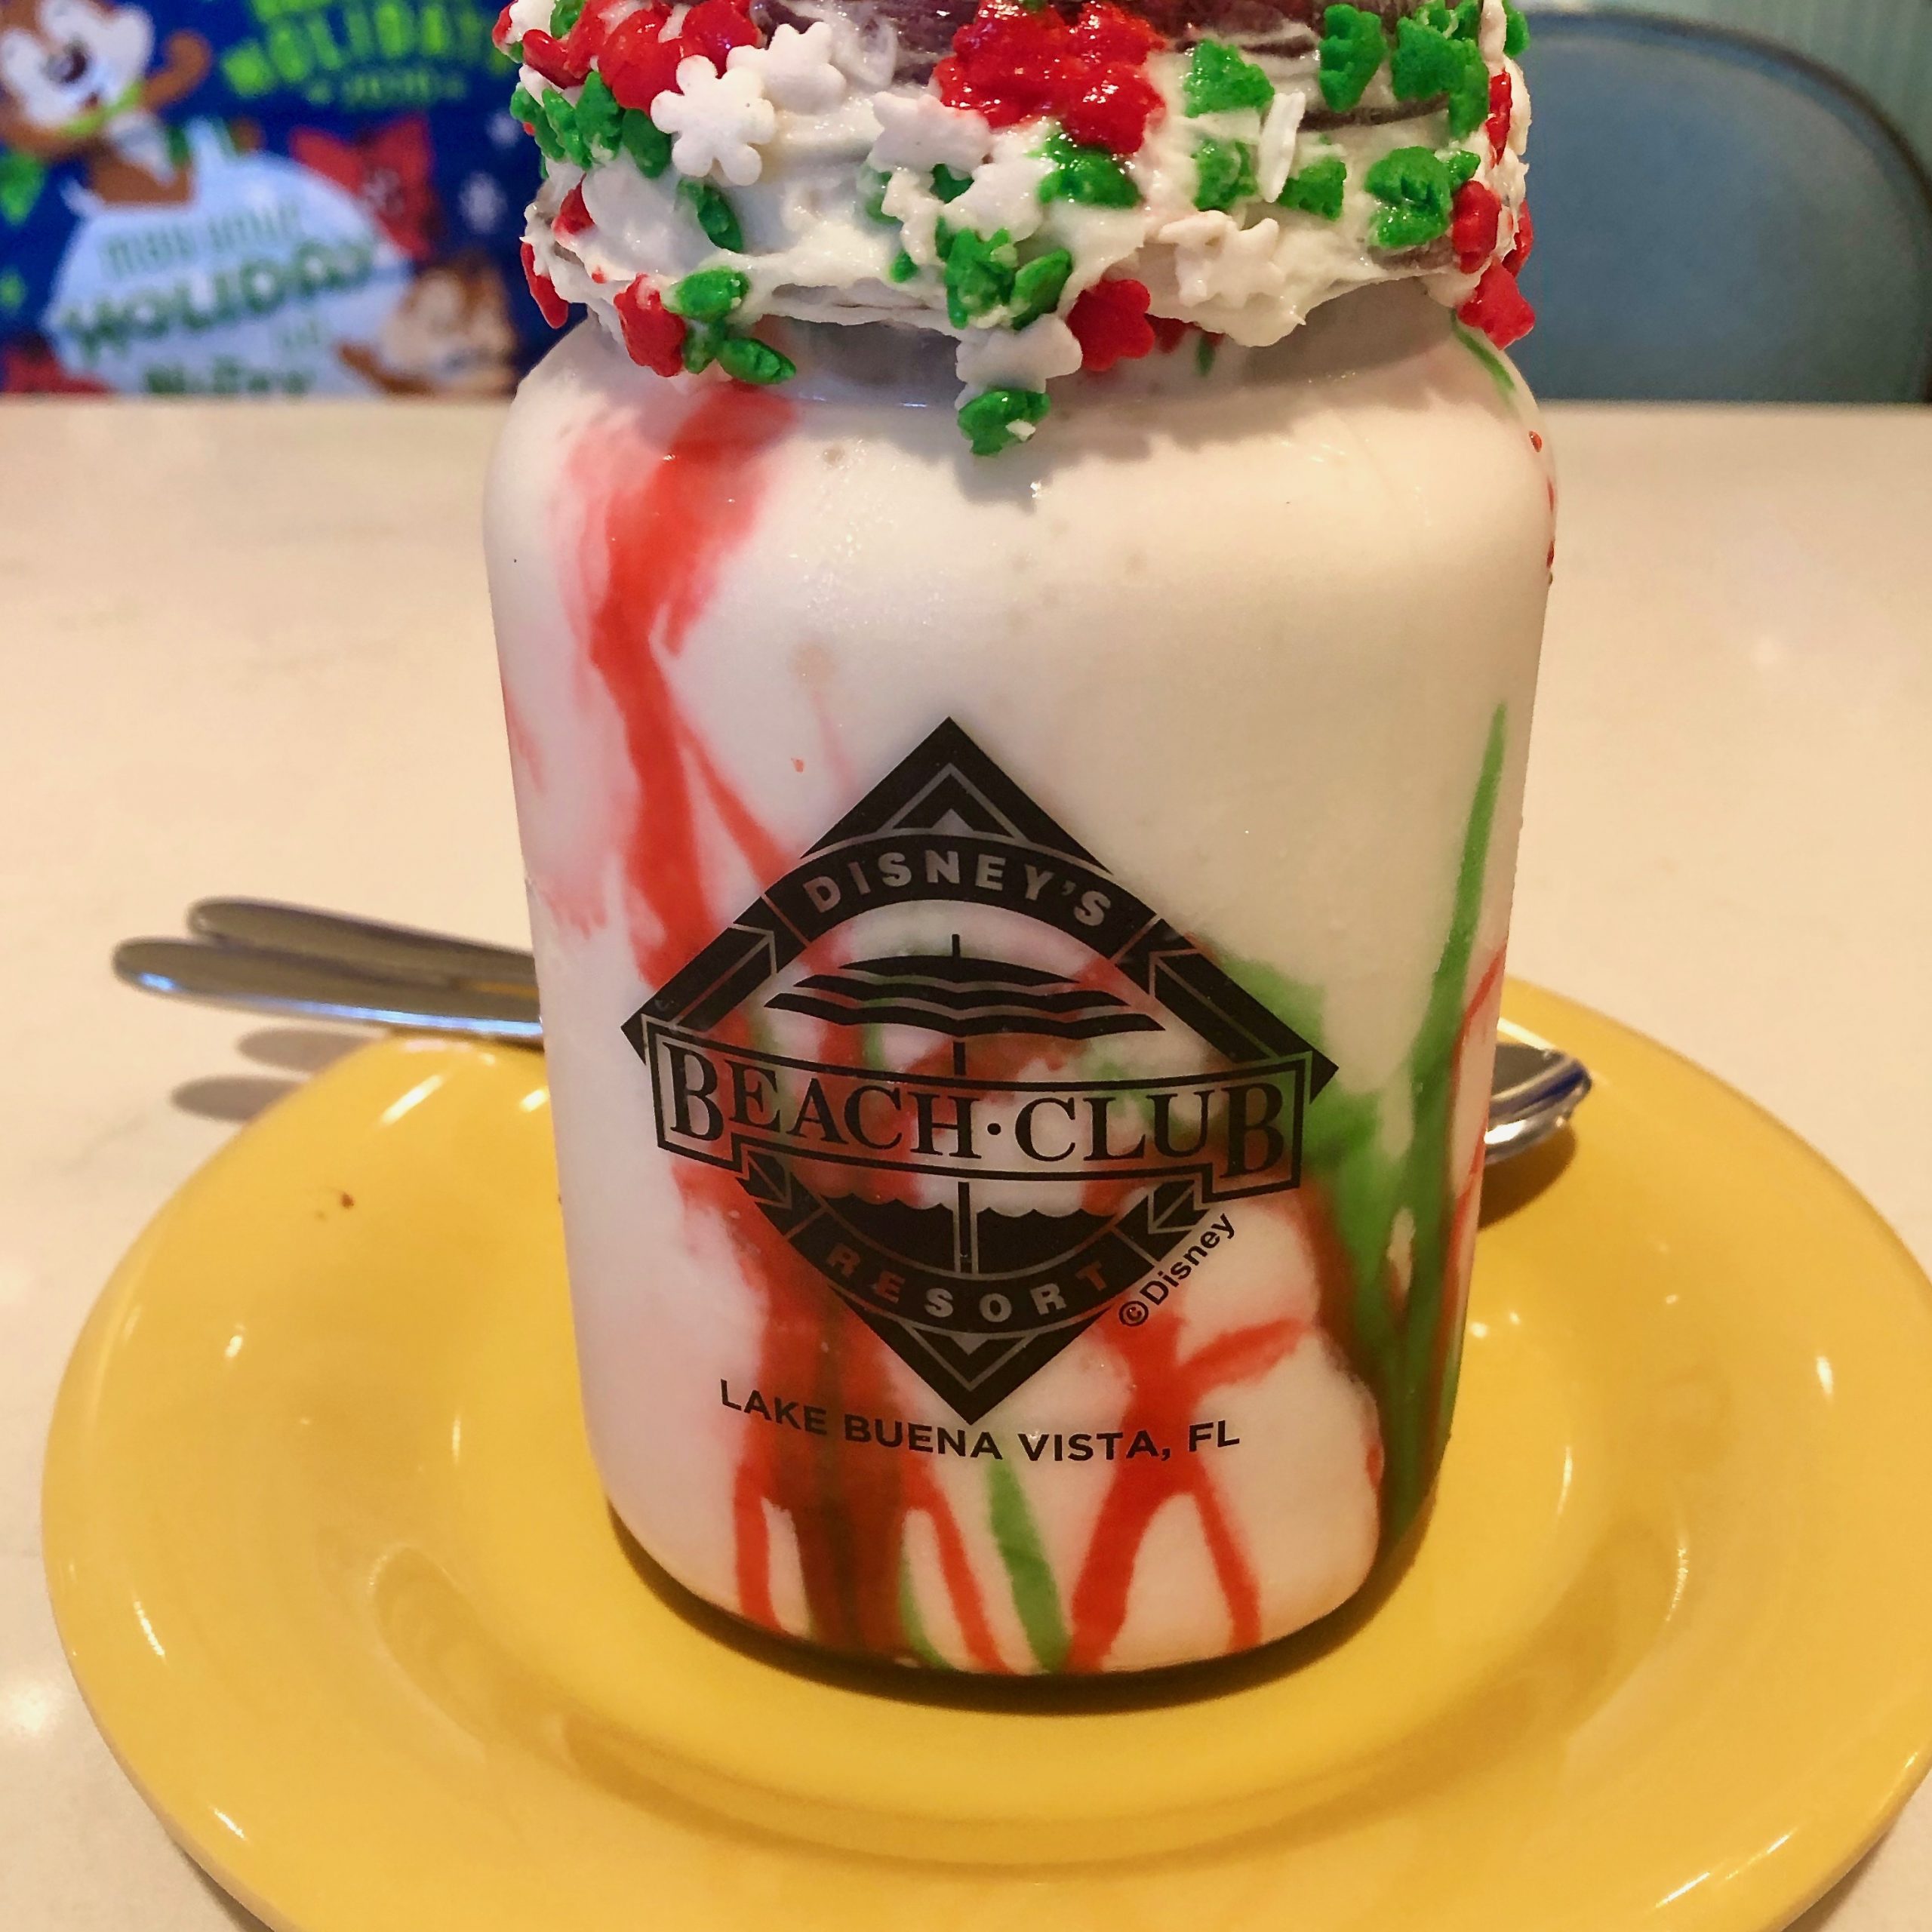 Beaches and Cream's Holiday shake also comes with a souvenir cup.